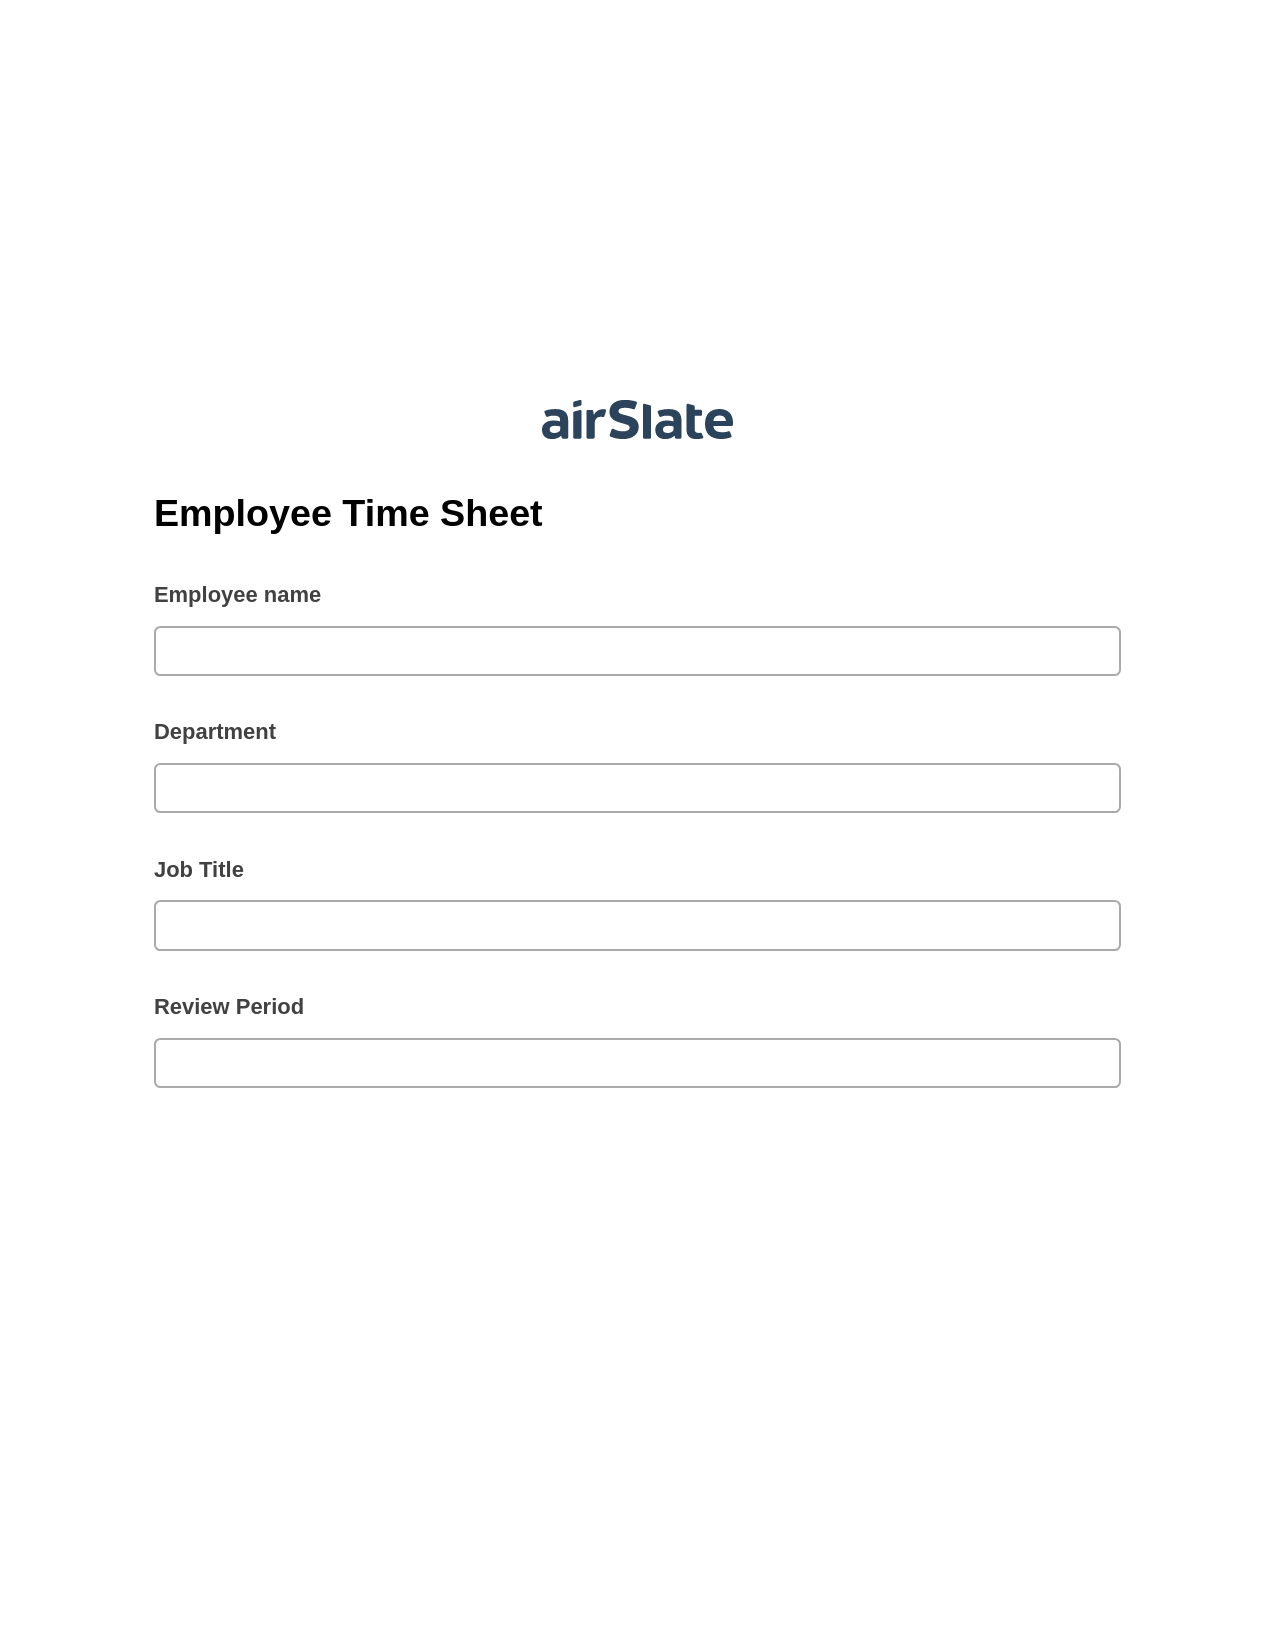 Employee Time Sheet Pre-fill Dropdowns from CSV file Bot, Update Audit Trail Bot, Export to Salesforce Record Bot